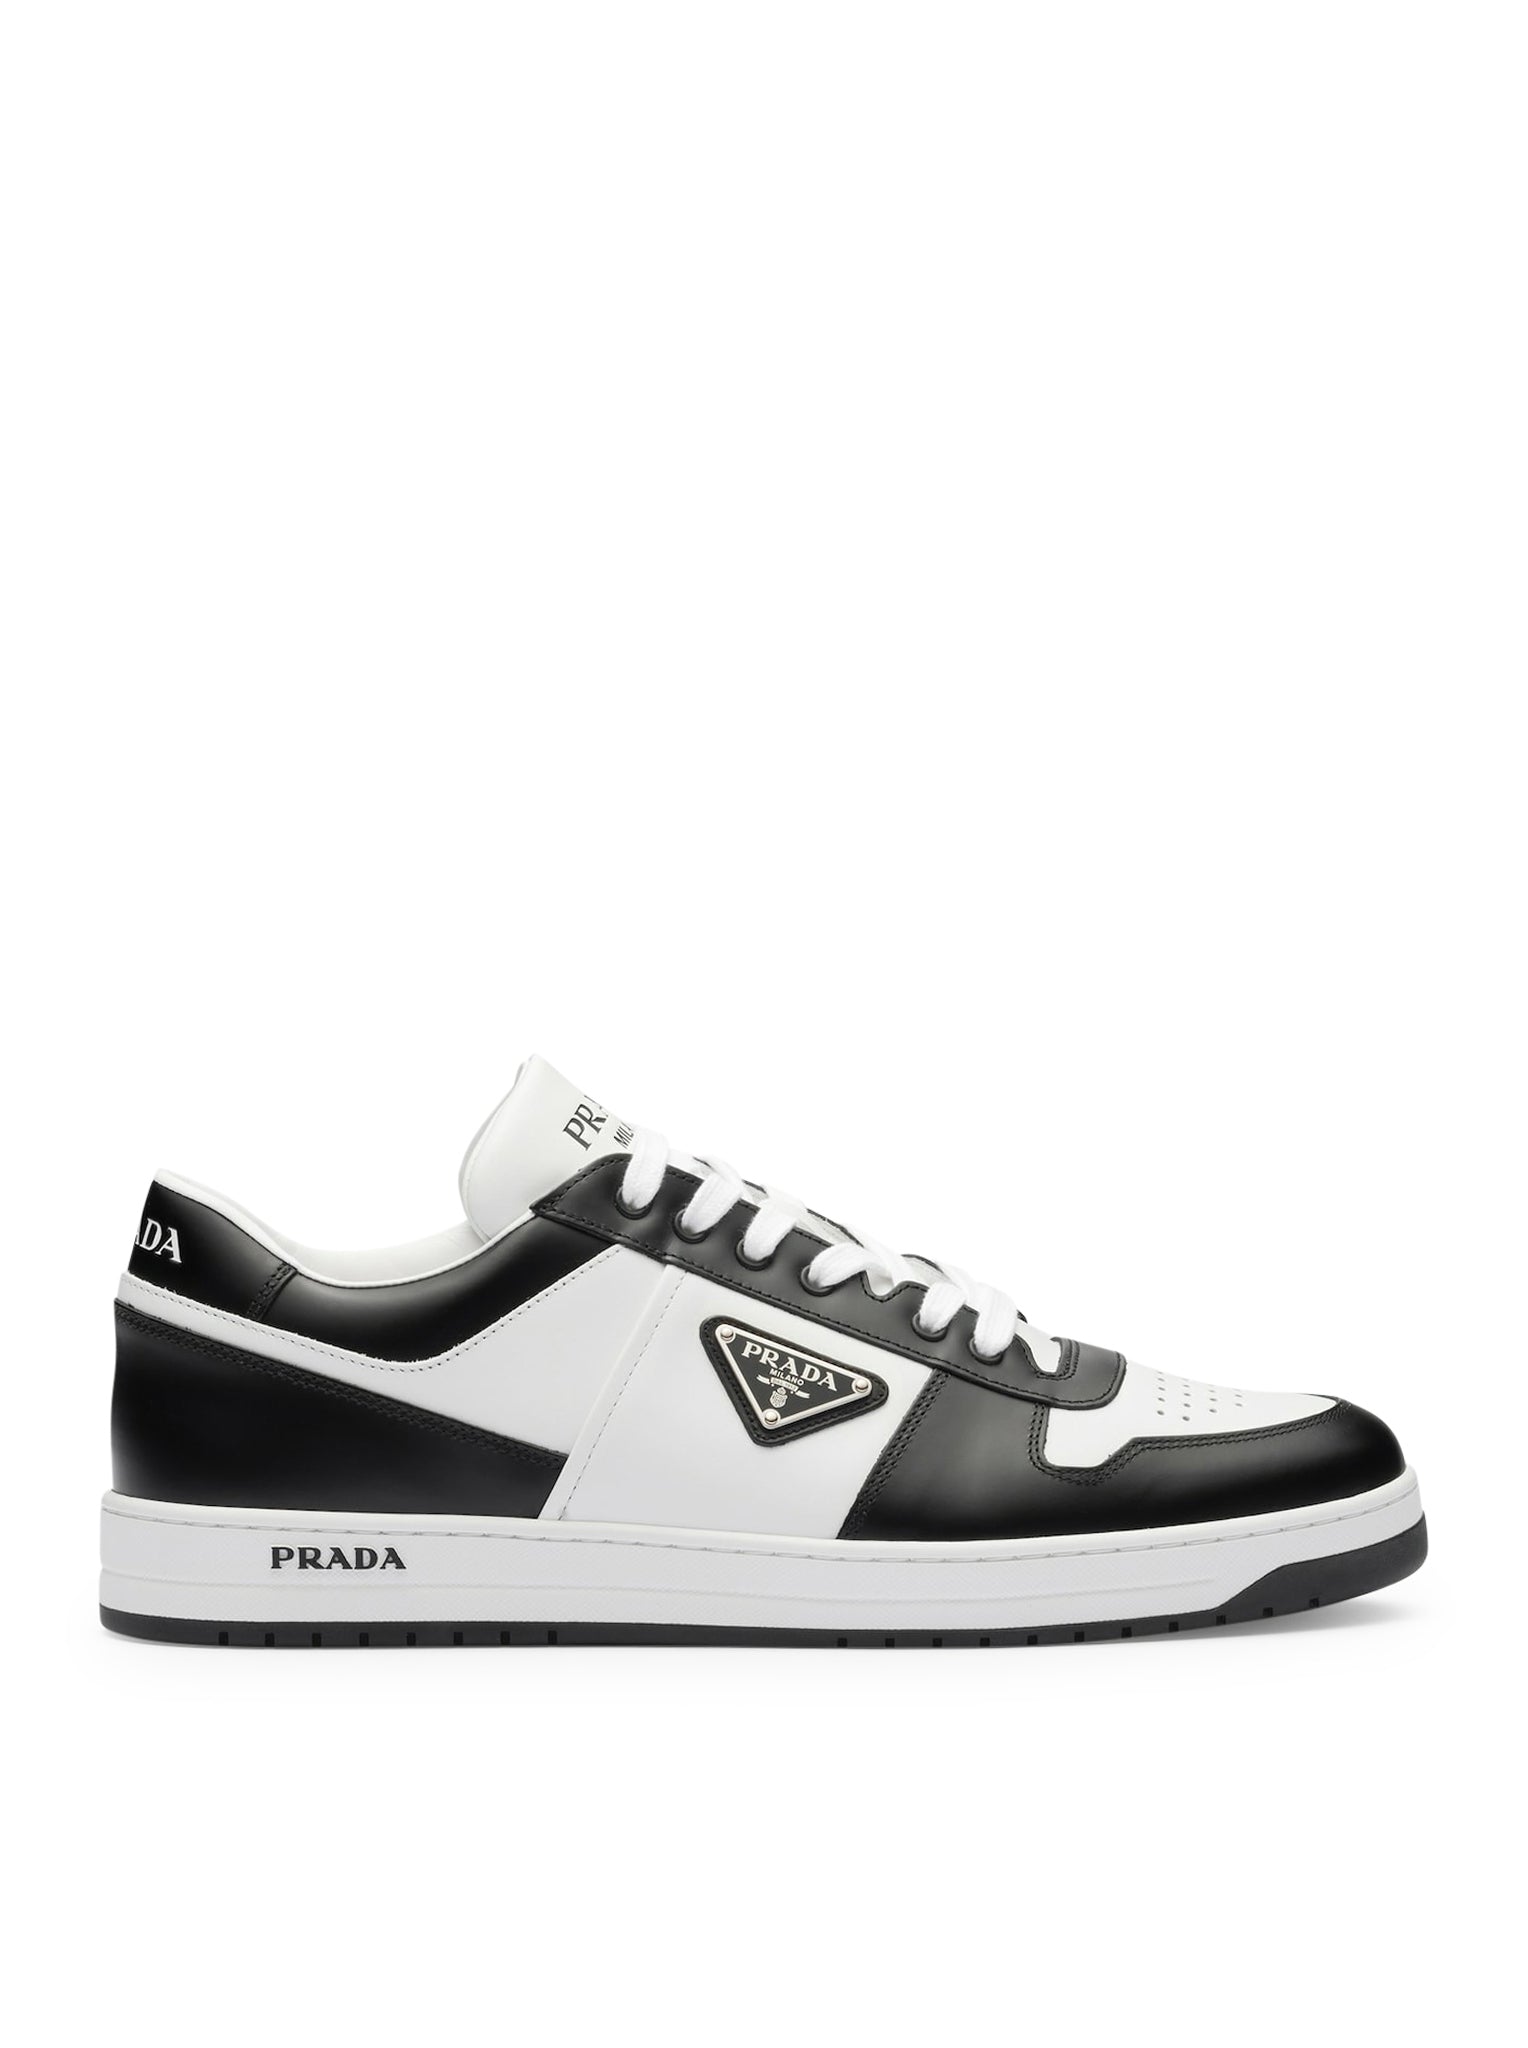 Downtown leather sneakers